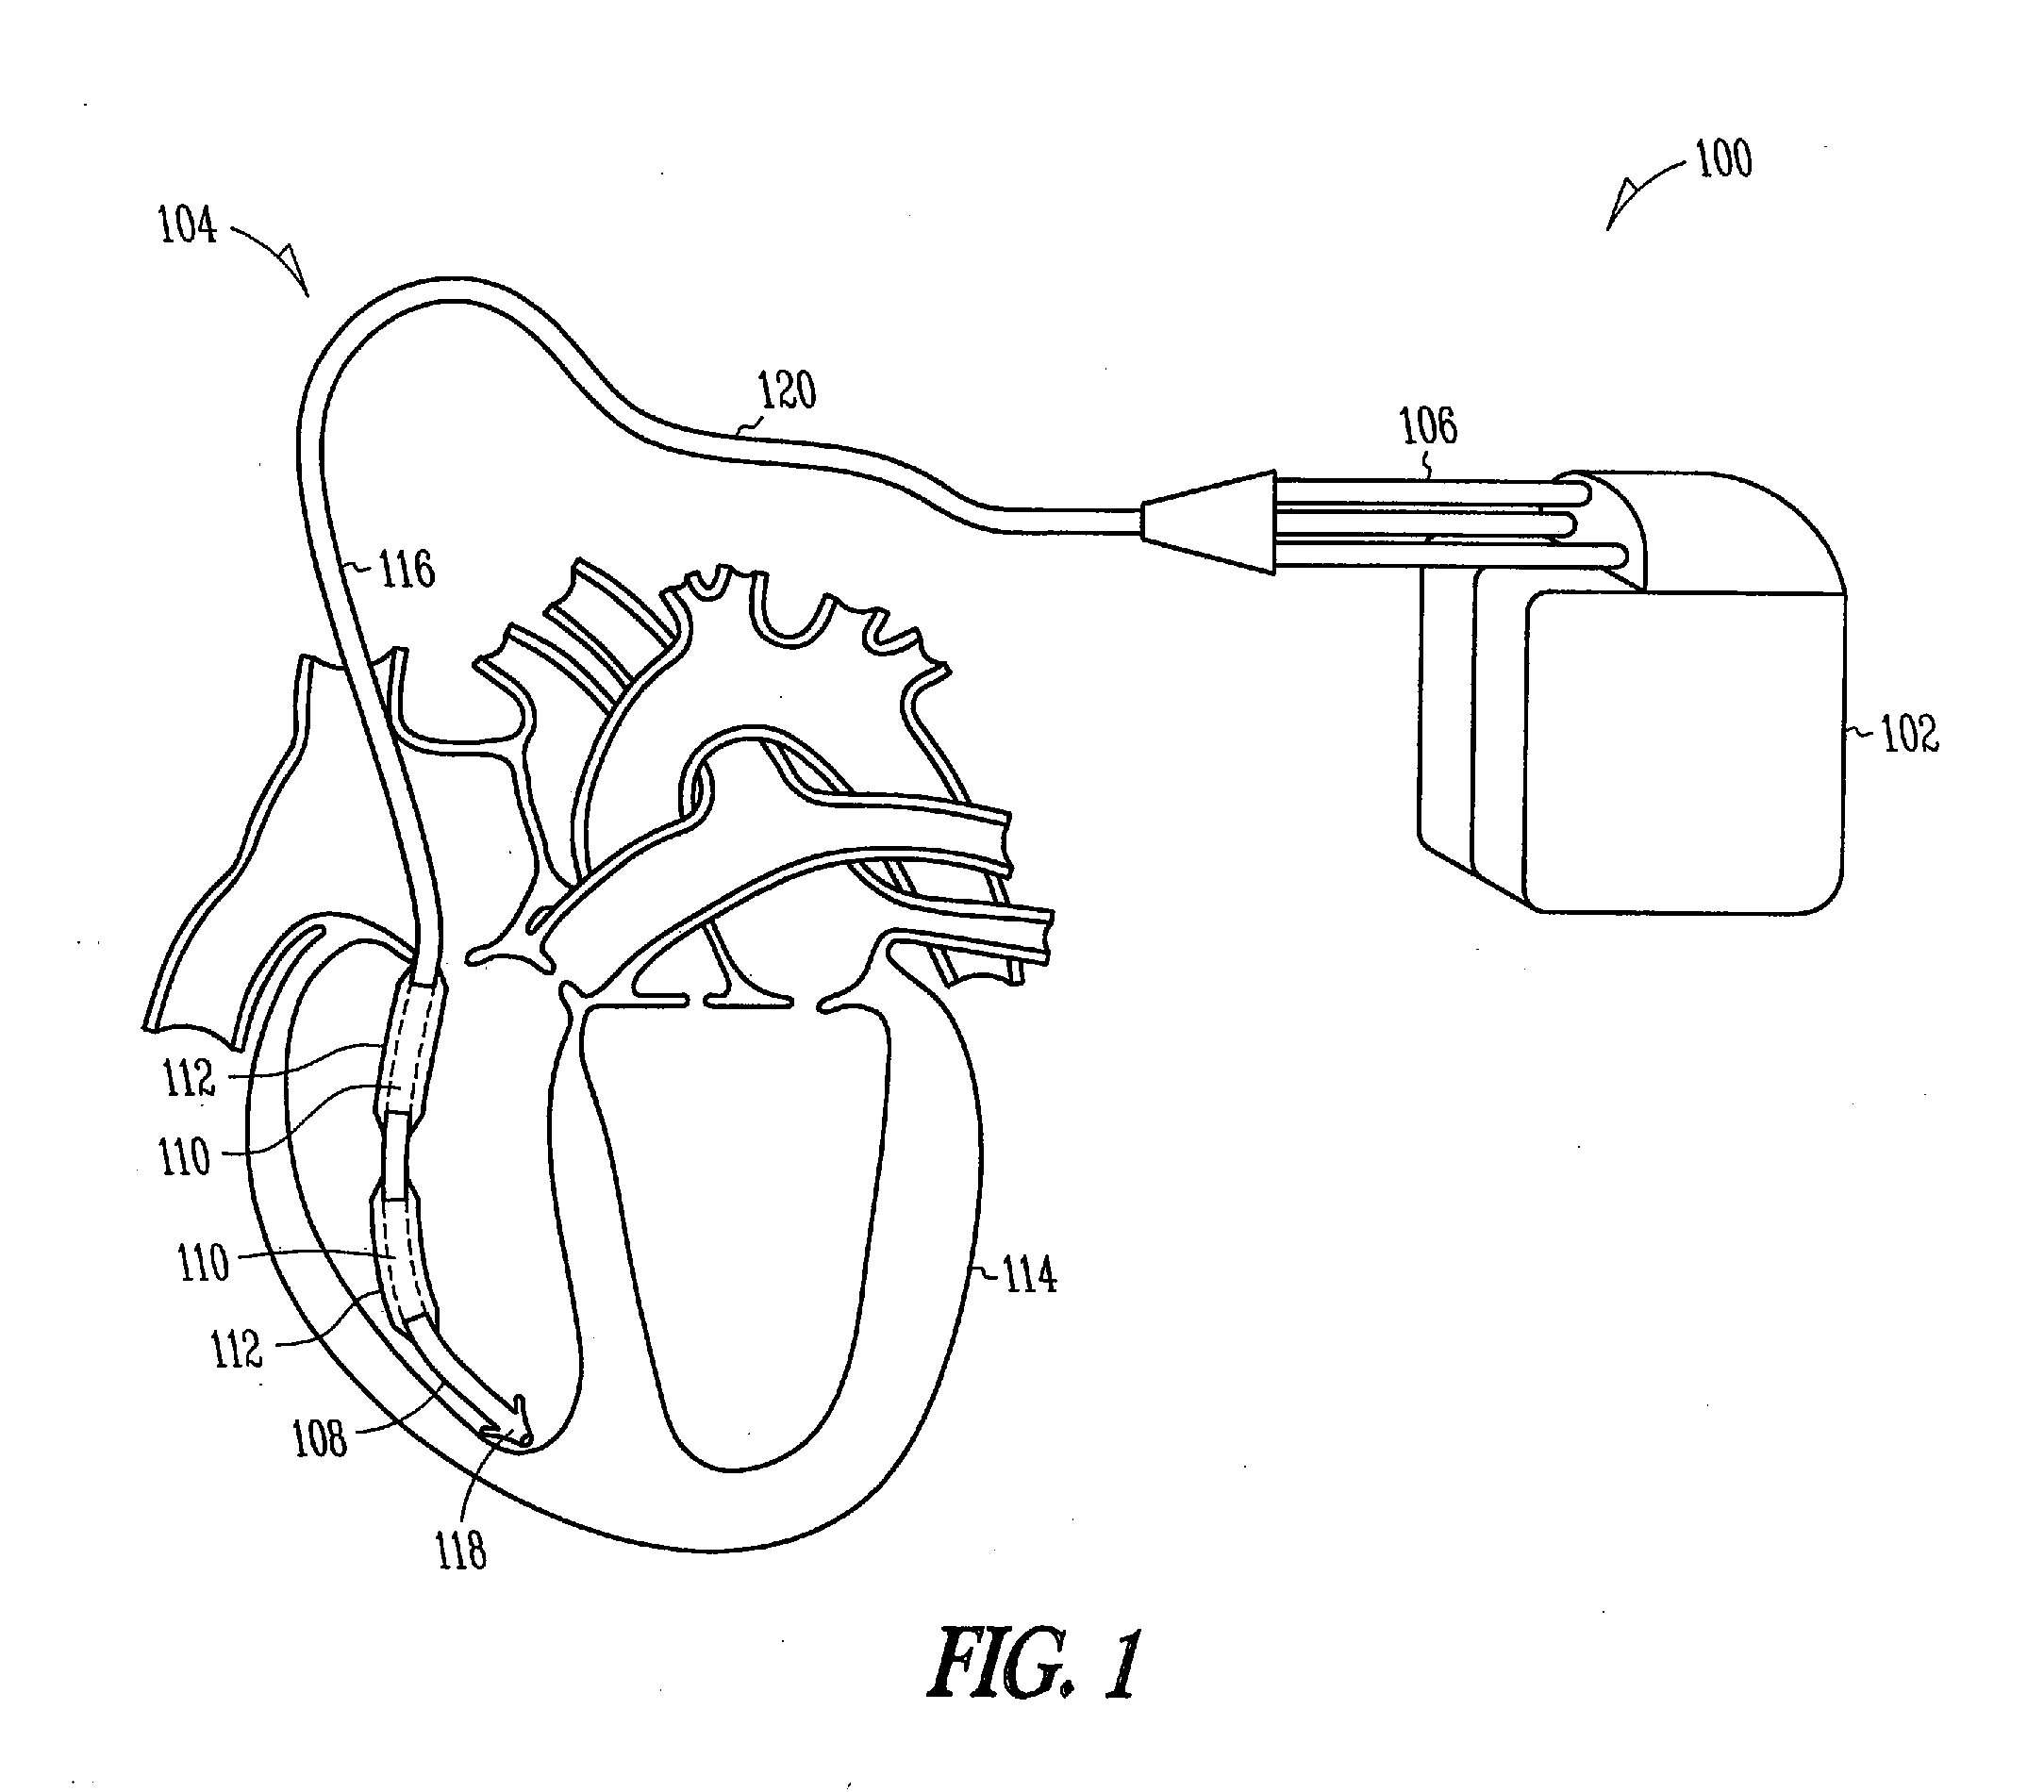 Fibrosis-limiting material attachment